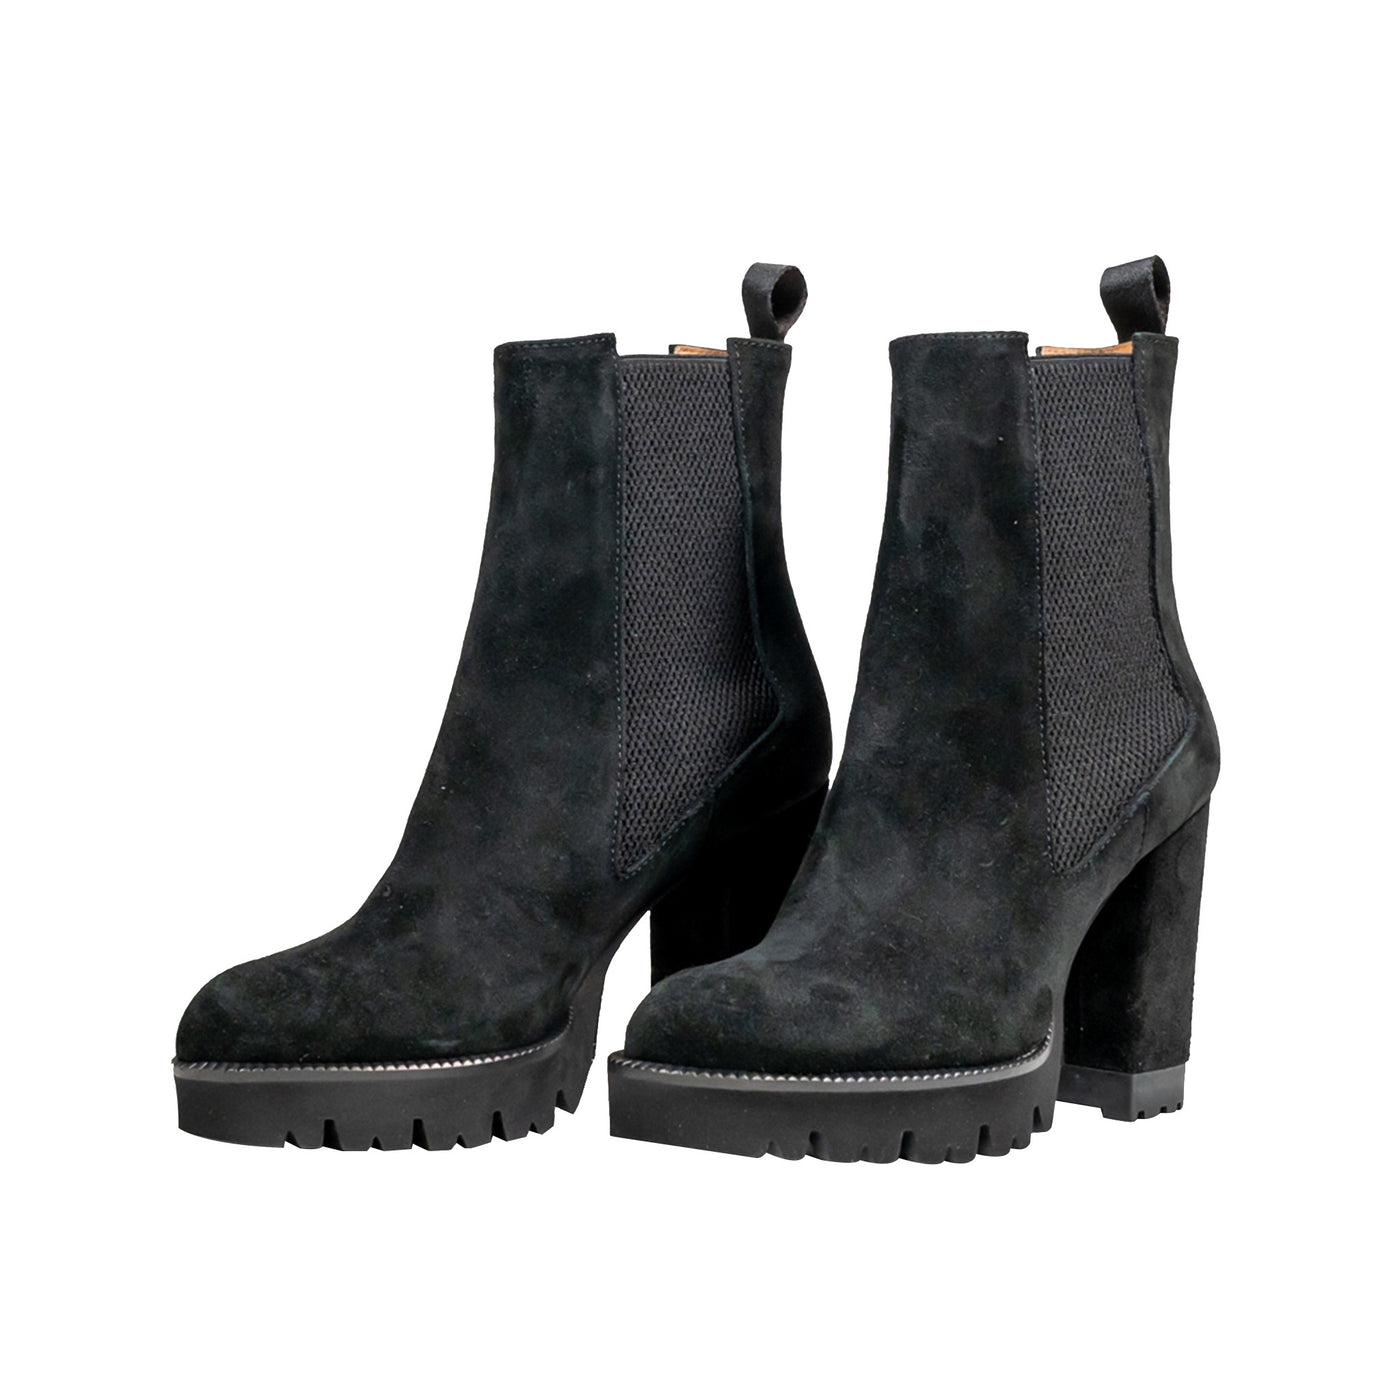 Women's suede ankle boot